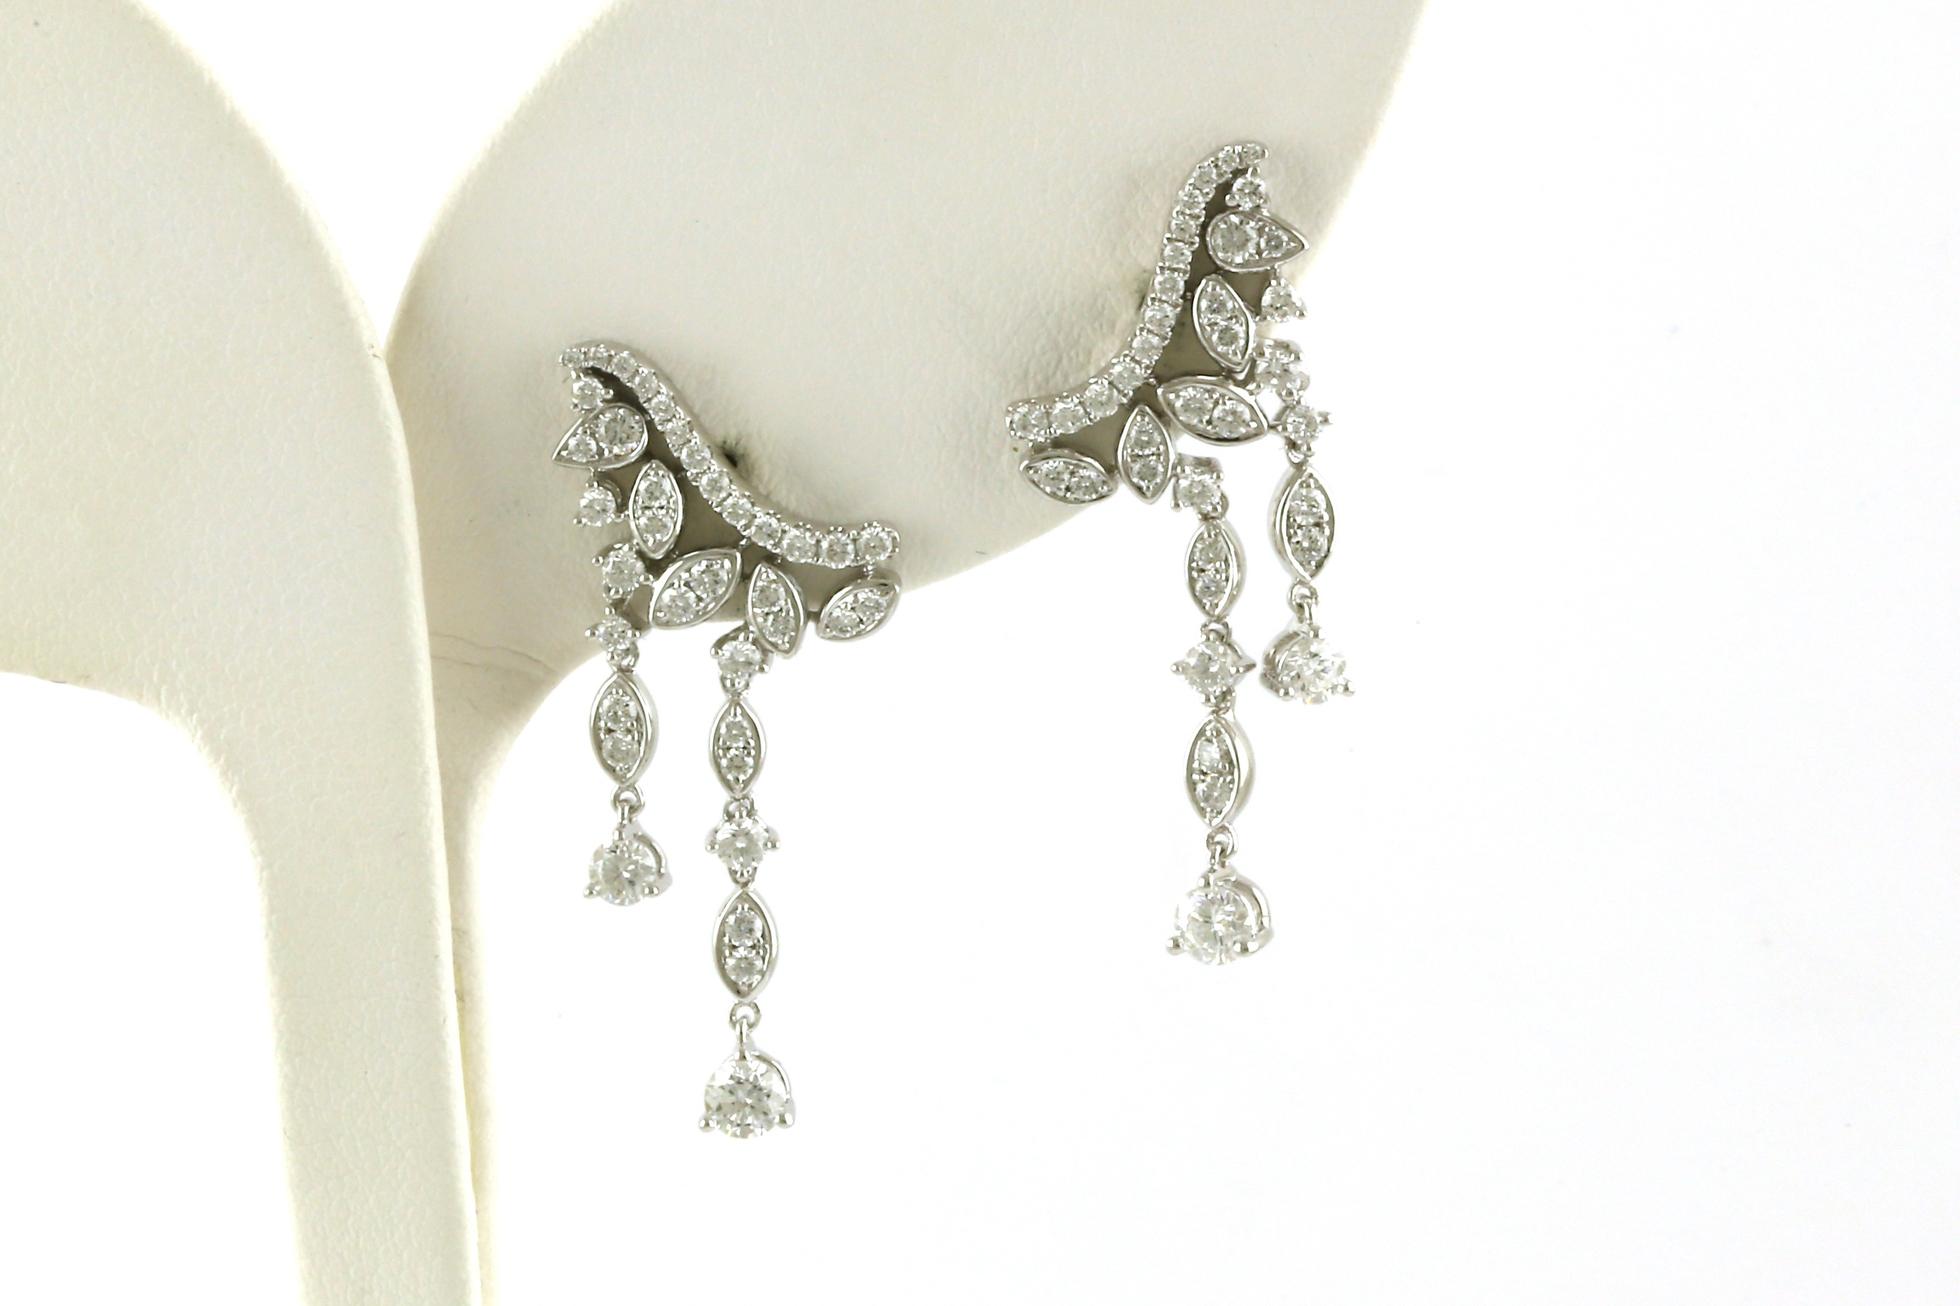 Fancy Dangling Curved Bar Diamond Earrings in White Gold (1.28cts TWT)